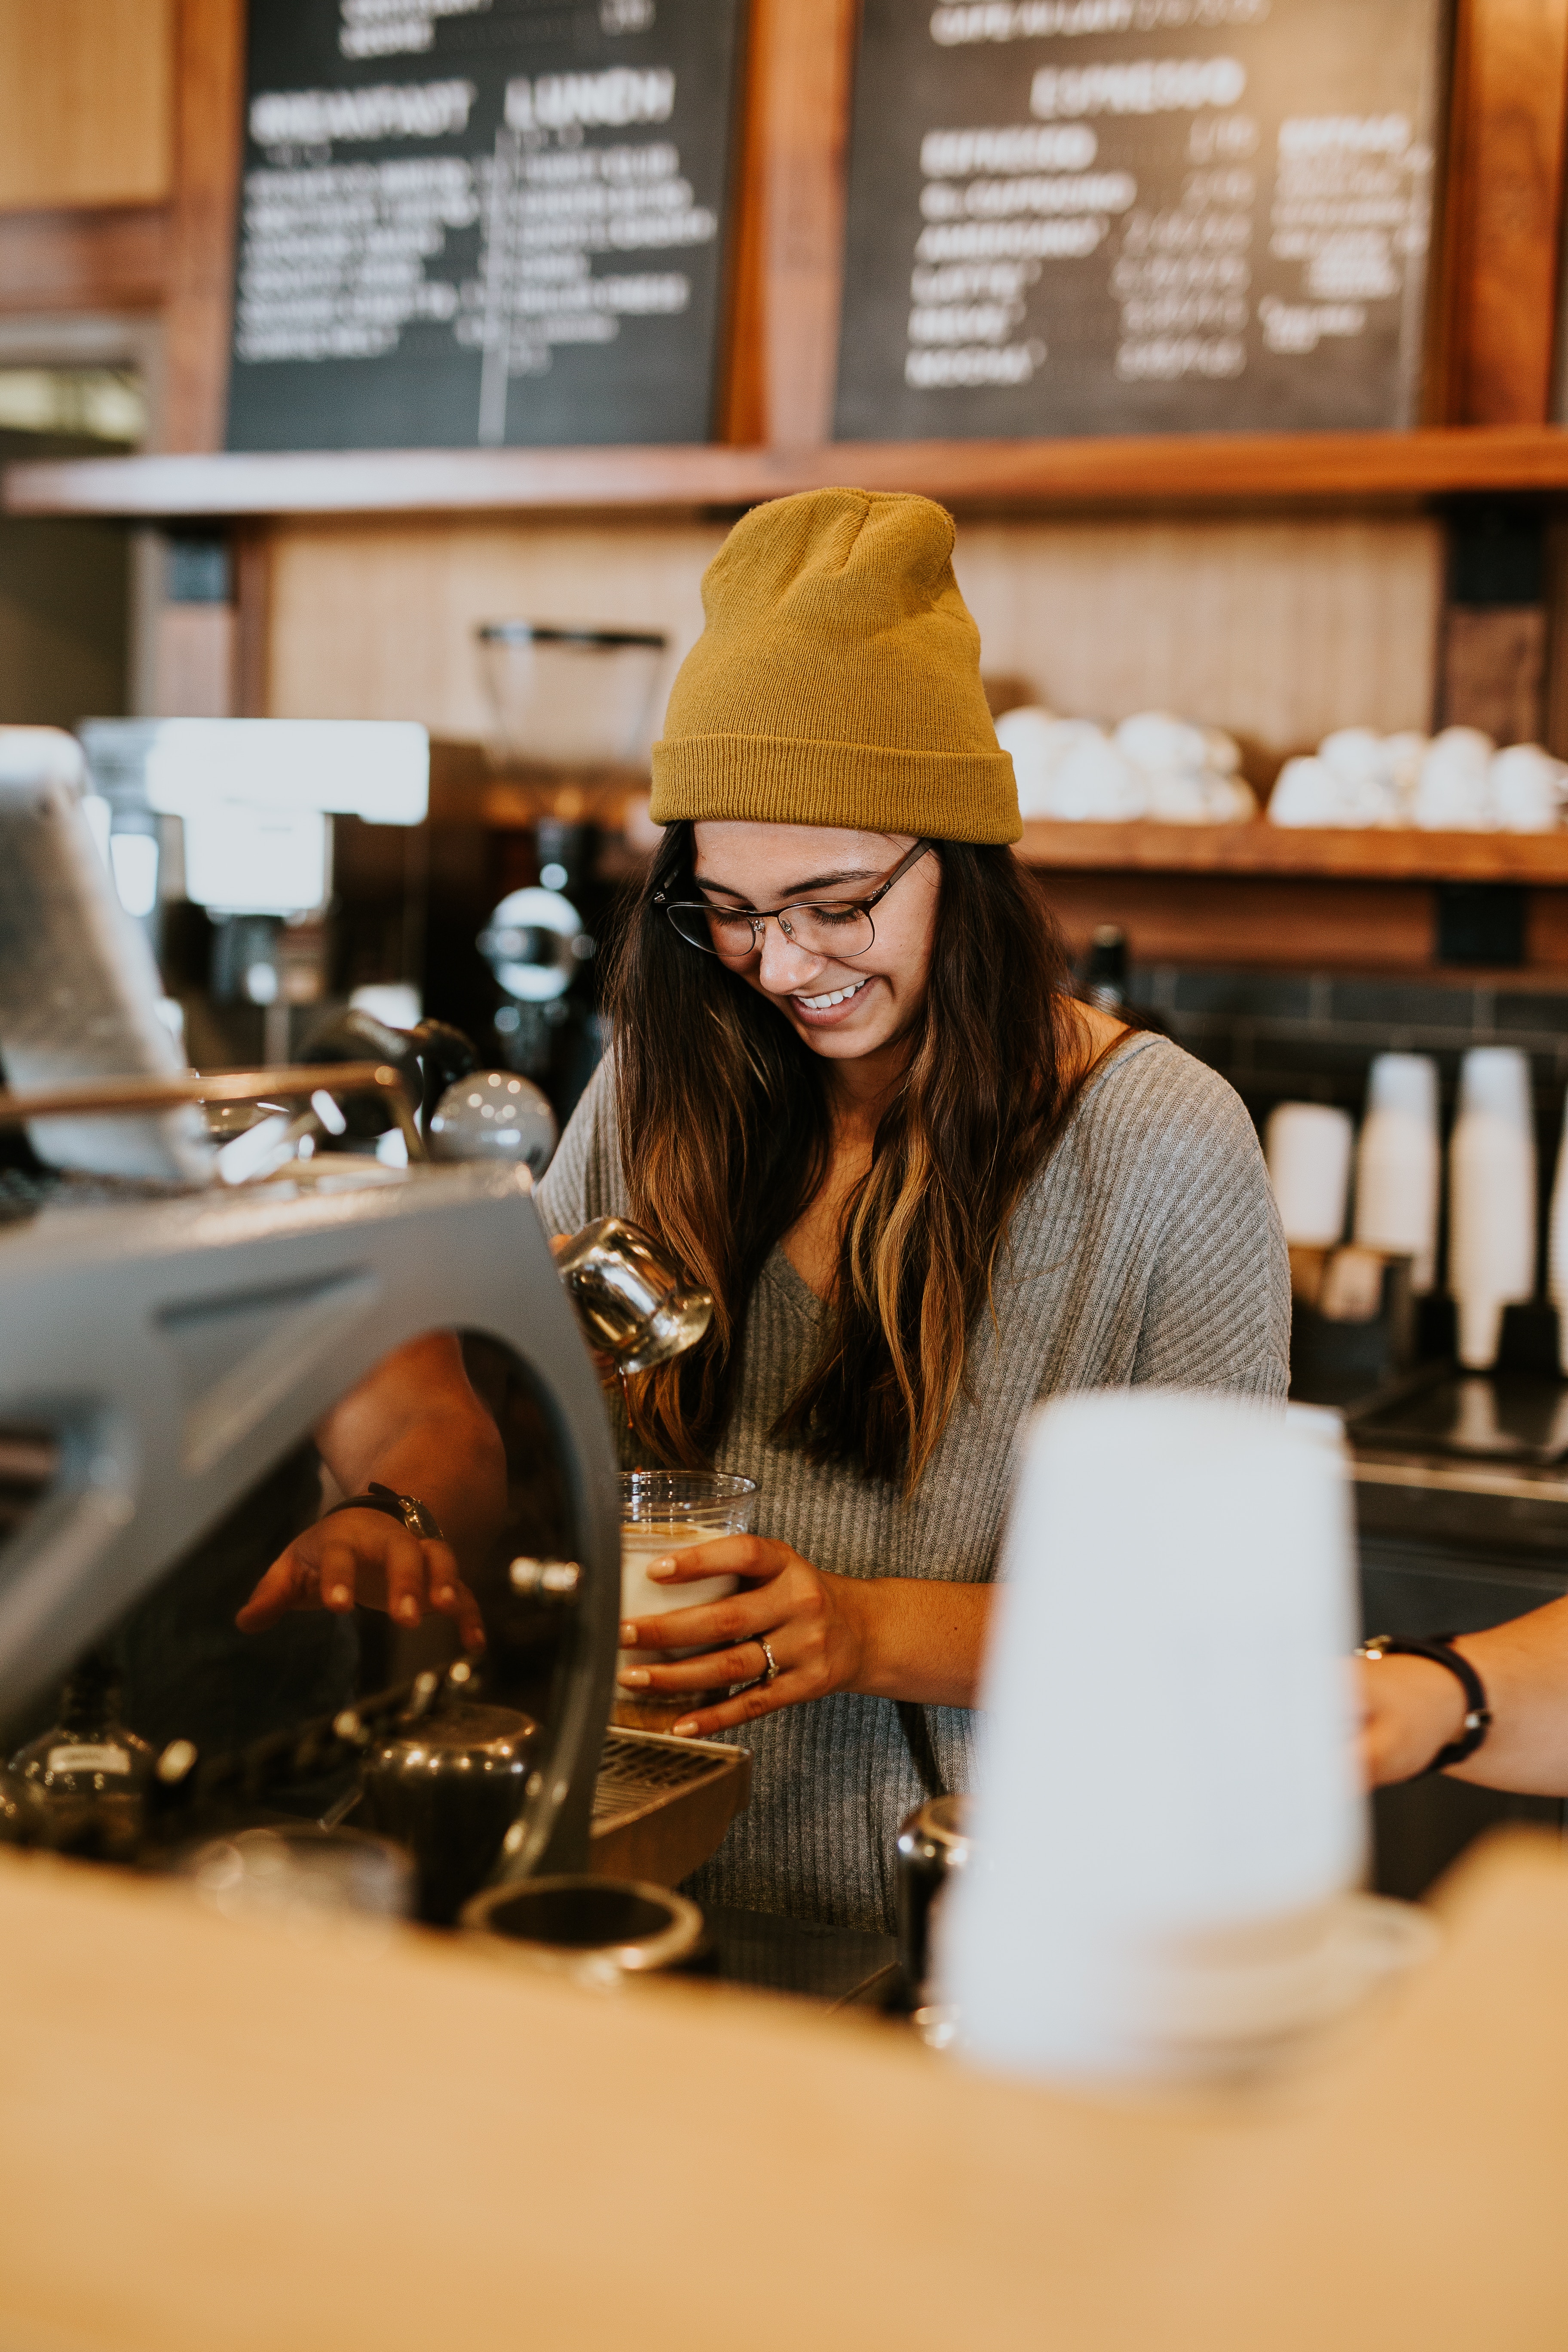 Happy student smiling while making coffee at a coffee shop